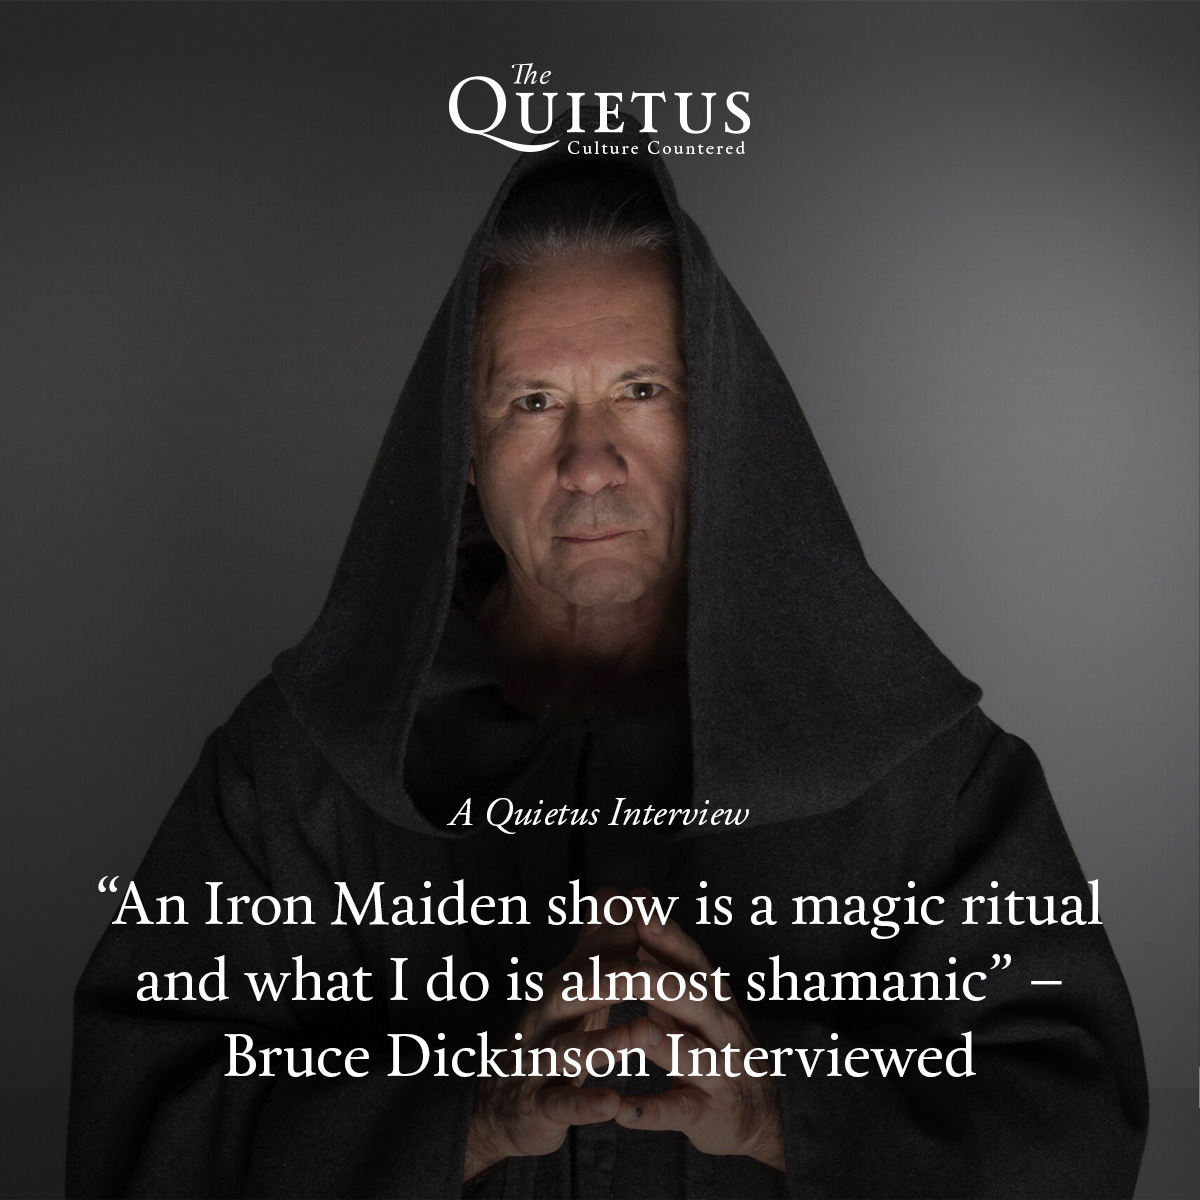 Kicking off the new Quietus, an interview we've been trying to make happen for years: #BruceDickinson speaks to @johnhiggs – discussing solo projects, magic, the hallucinatory mandrake root, William Blake, #IronMaiden and more. thequietus.com/interviews/bru…